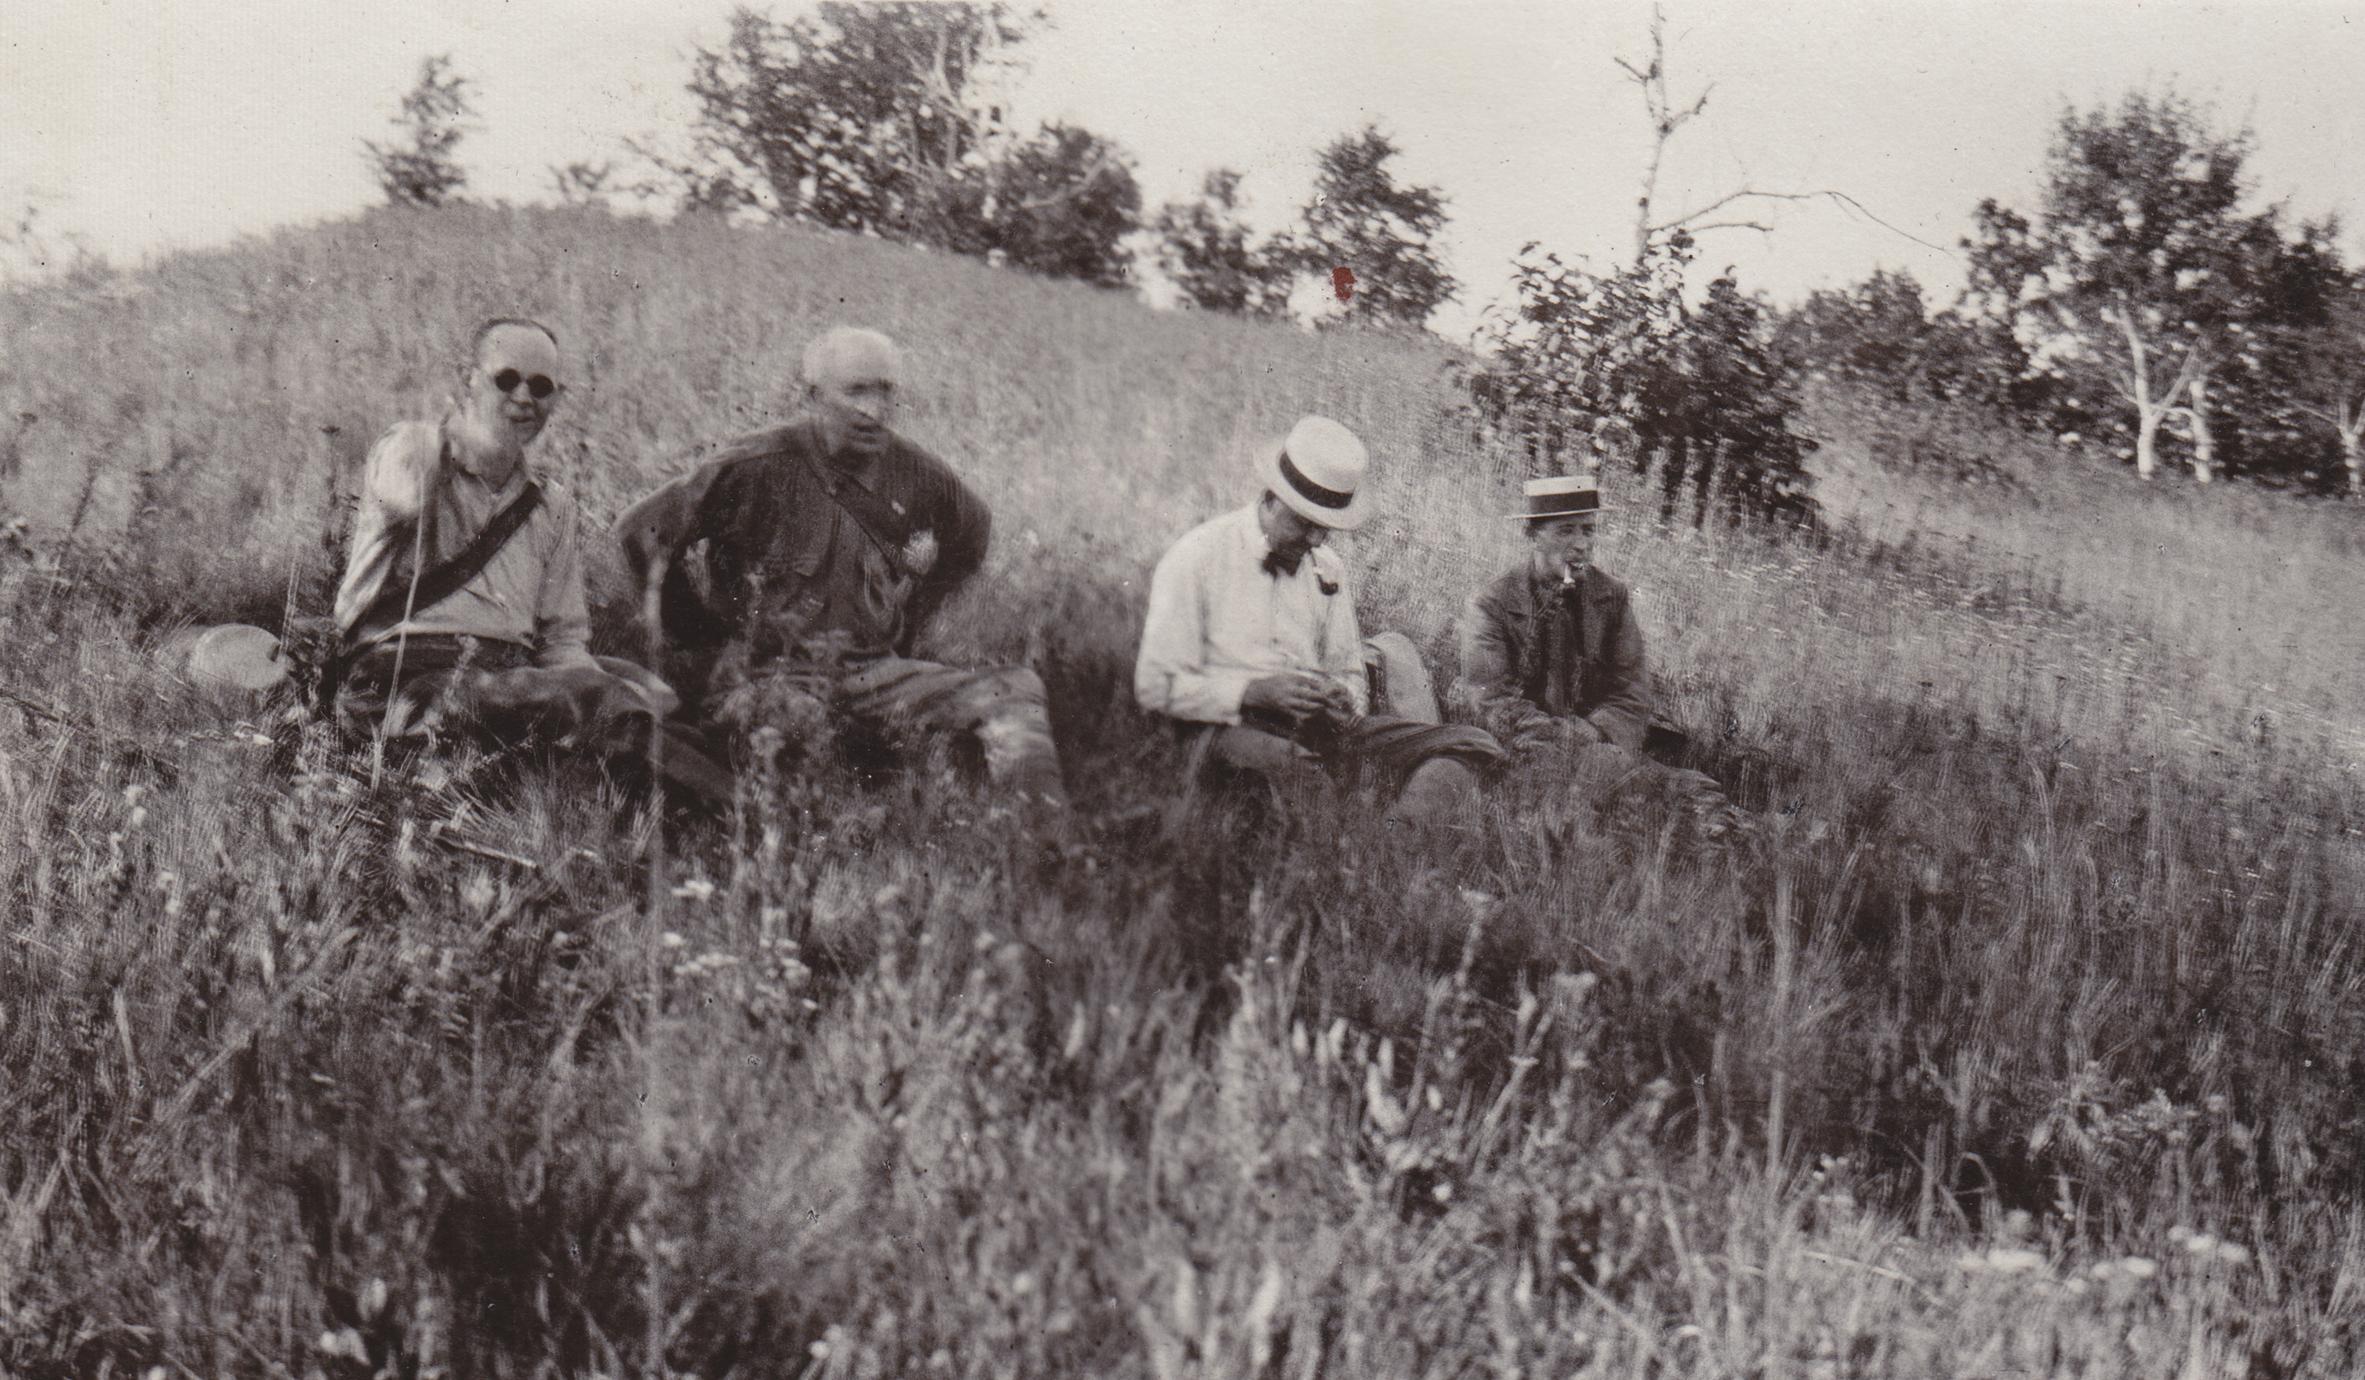 Geologists resting on bluff